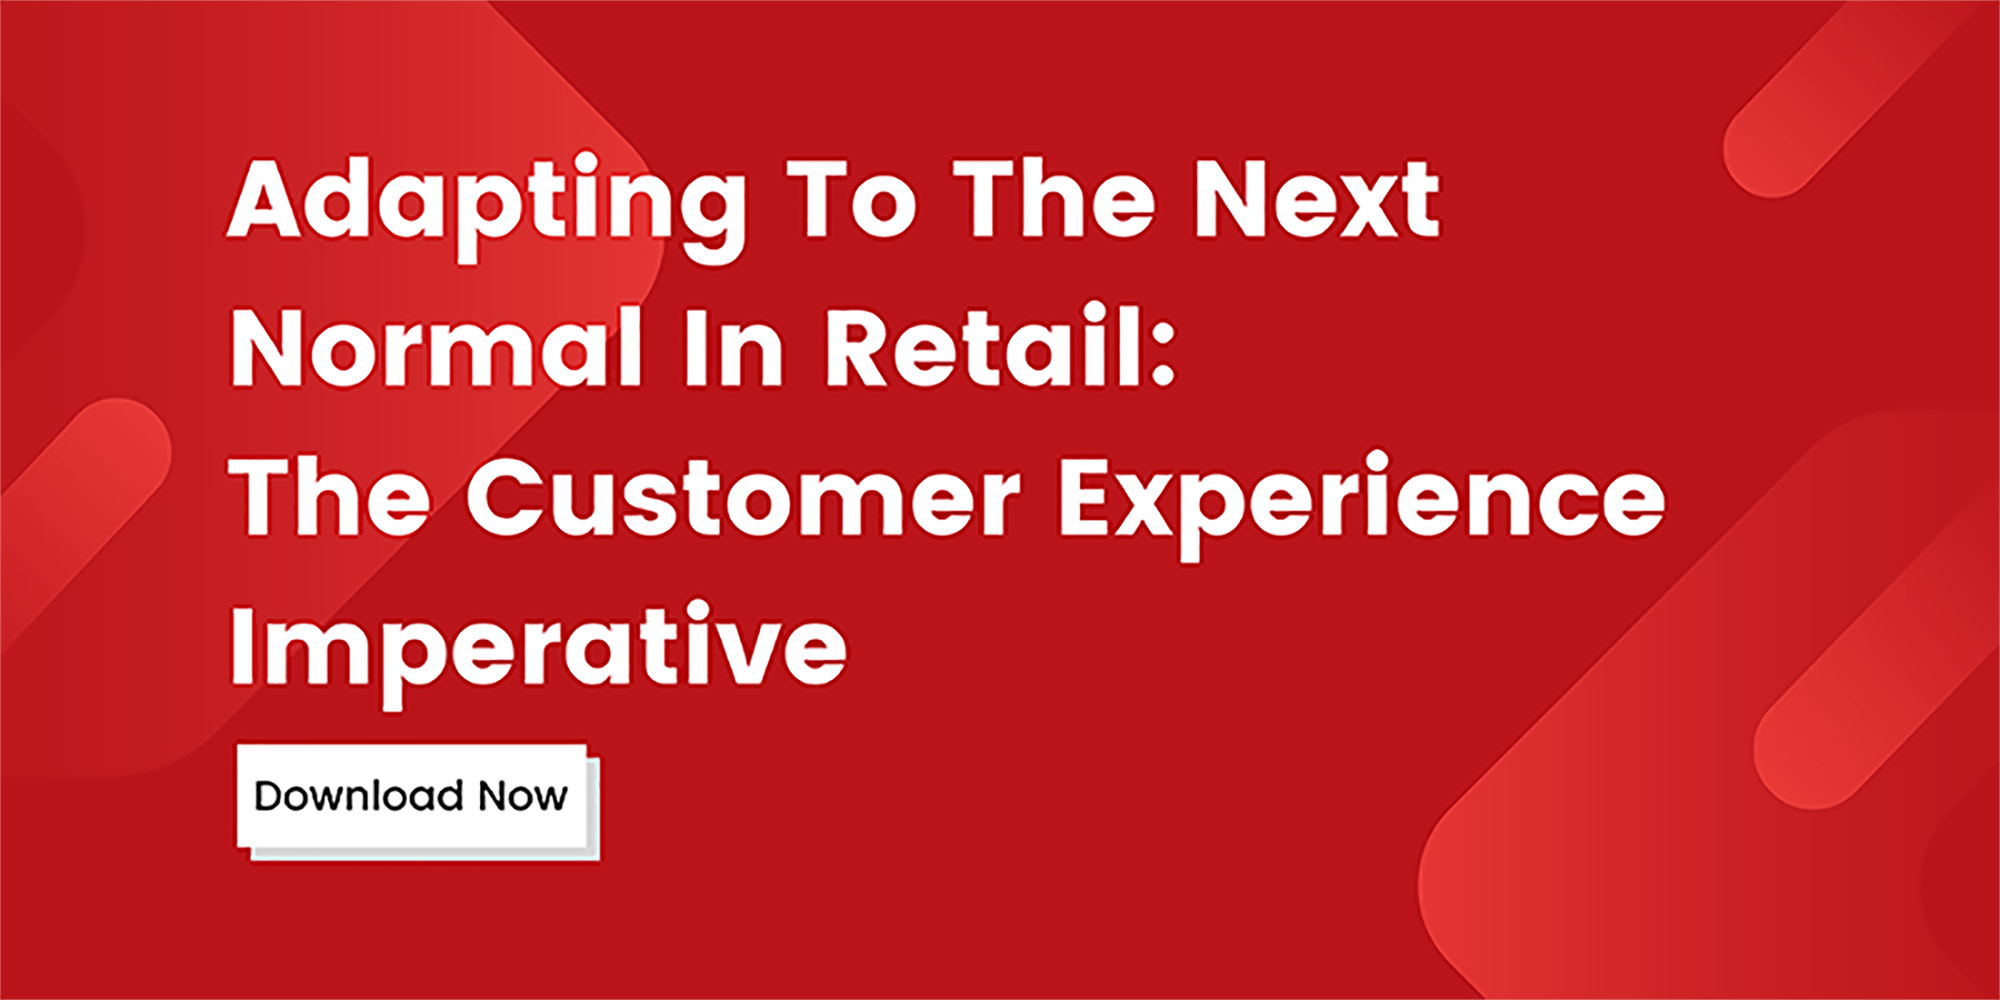 Adapting To The Next Normal In Retail: The Customer Experience Imperative